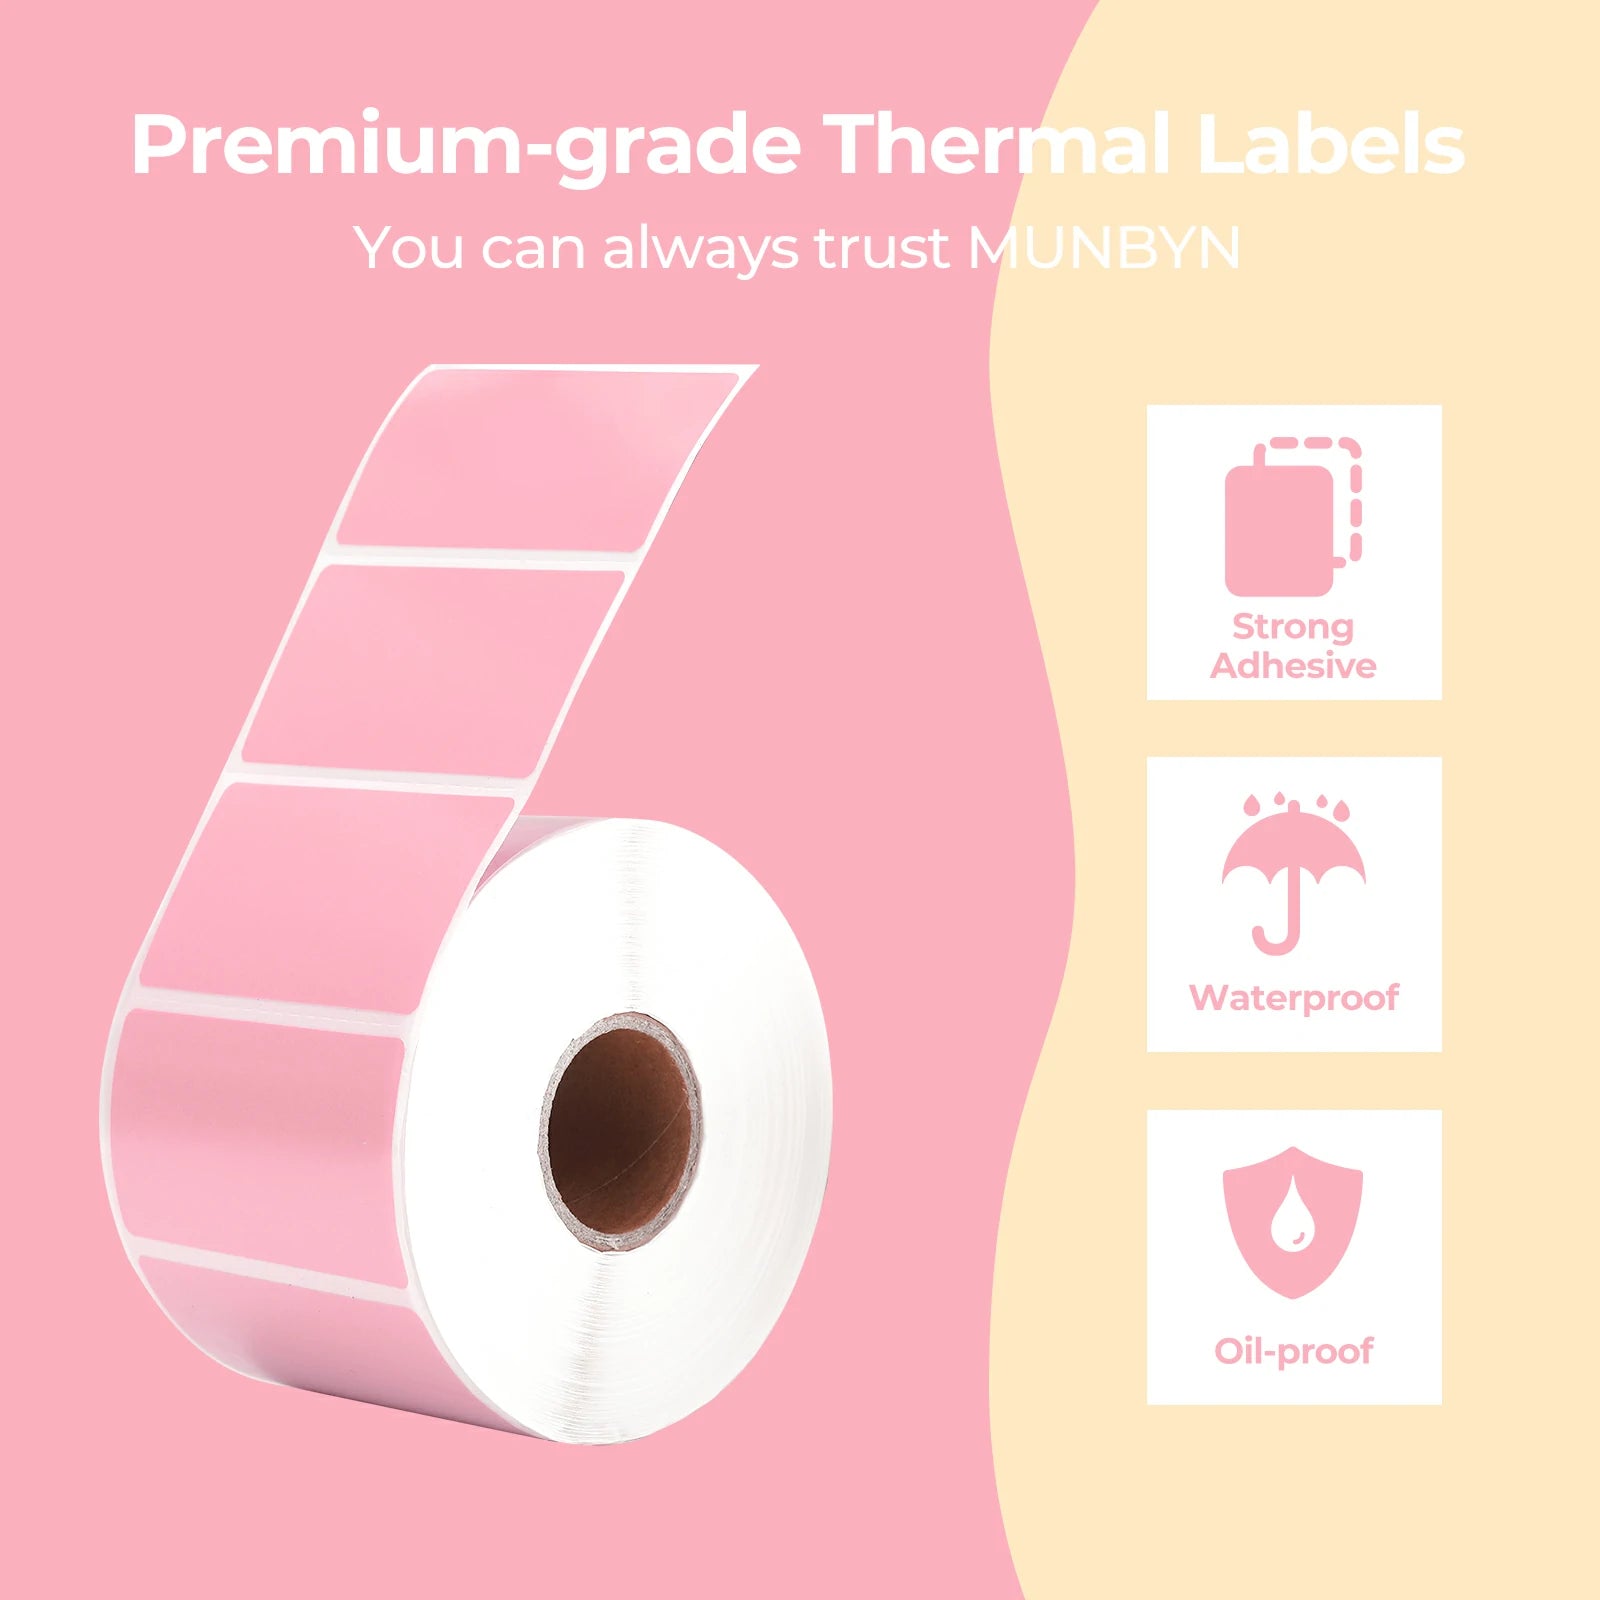 With their water and oil resistance, MUNBYN pink rectangle thermal labels are ideal for labeling products that will be exposed to moisture or greasy substances.